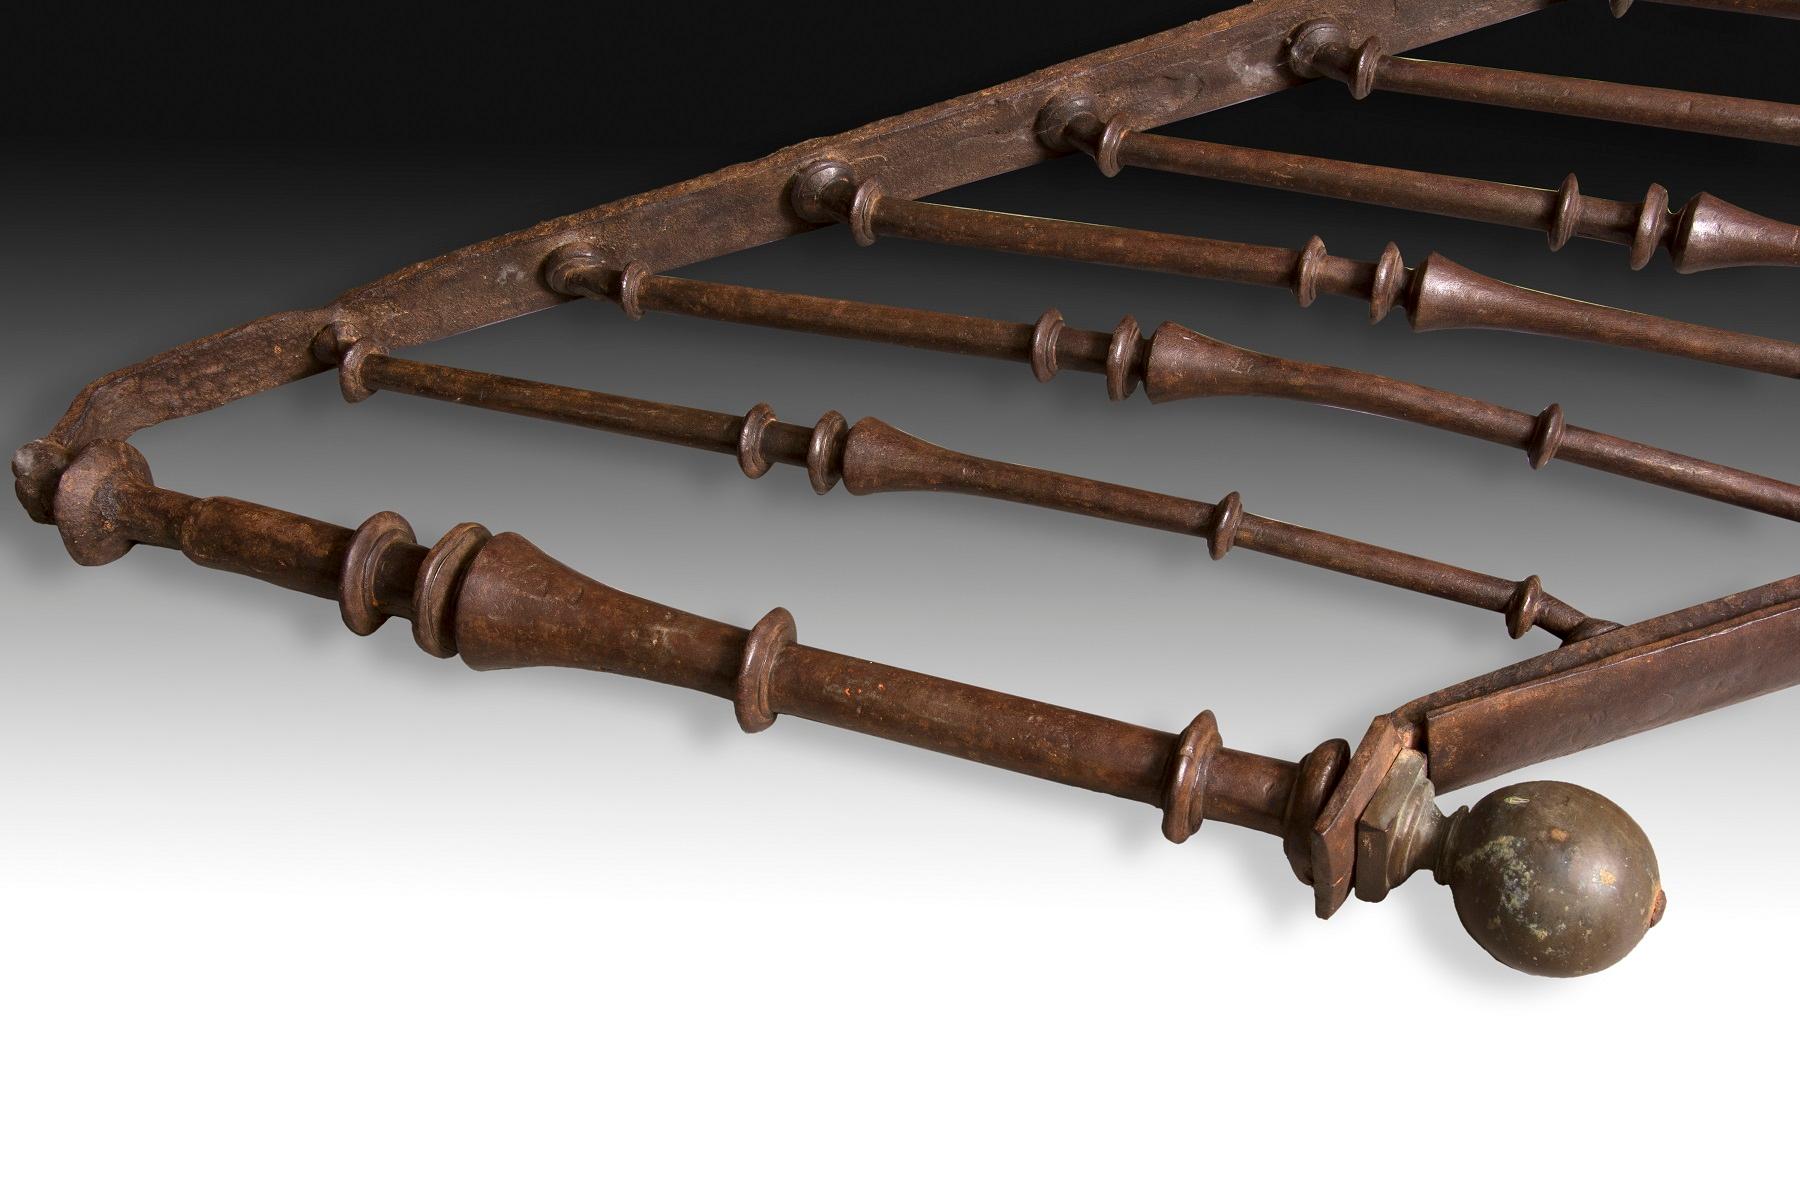 Renaissance Railing with Banisters, Wrought Iron, 16th Century